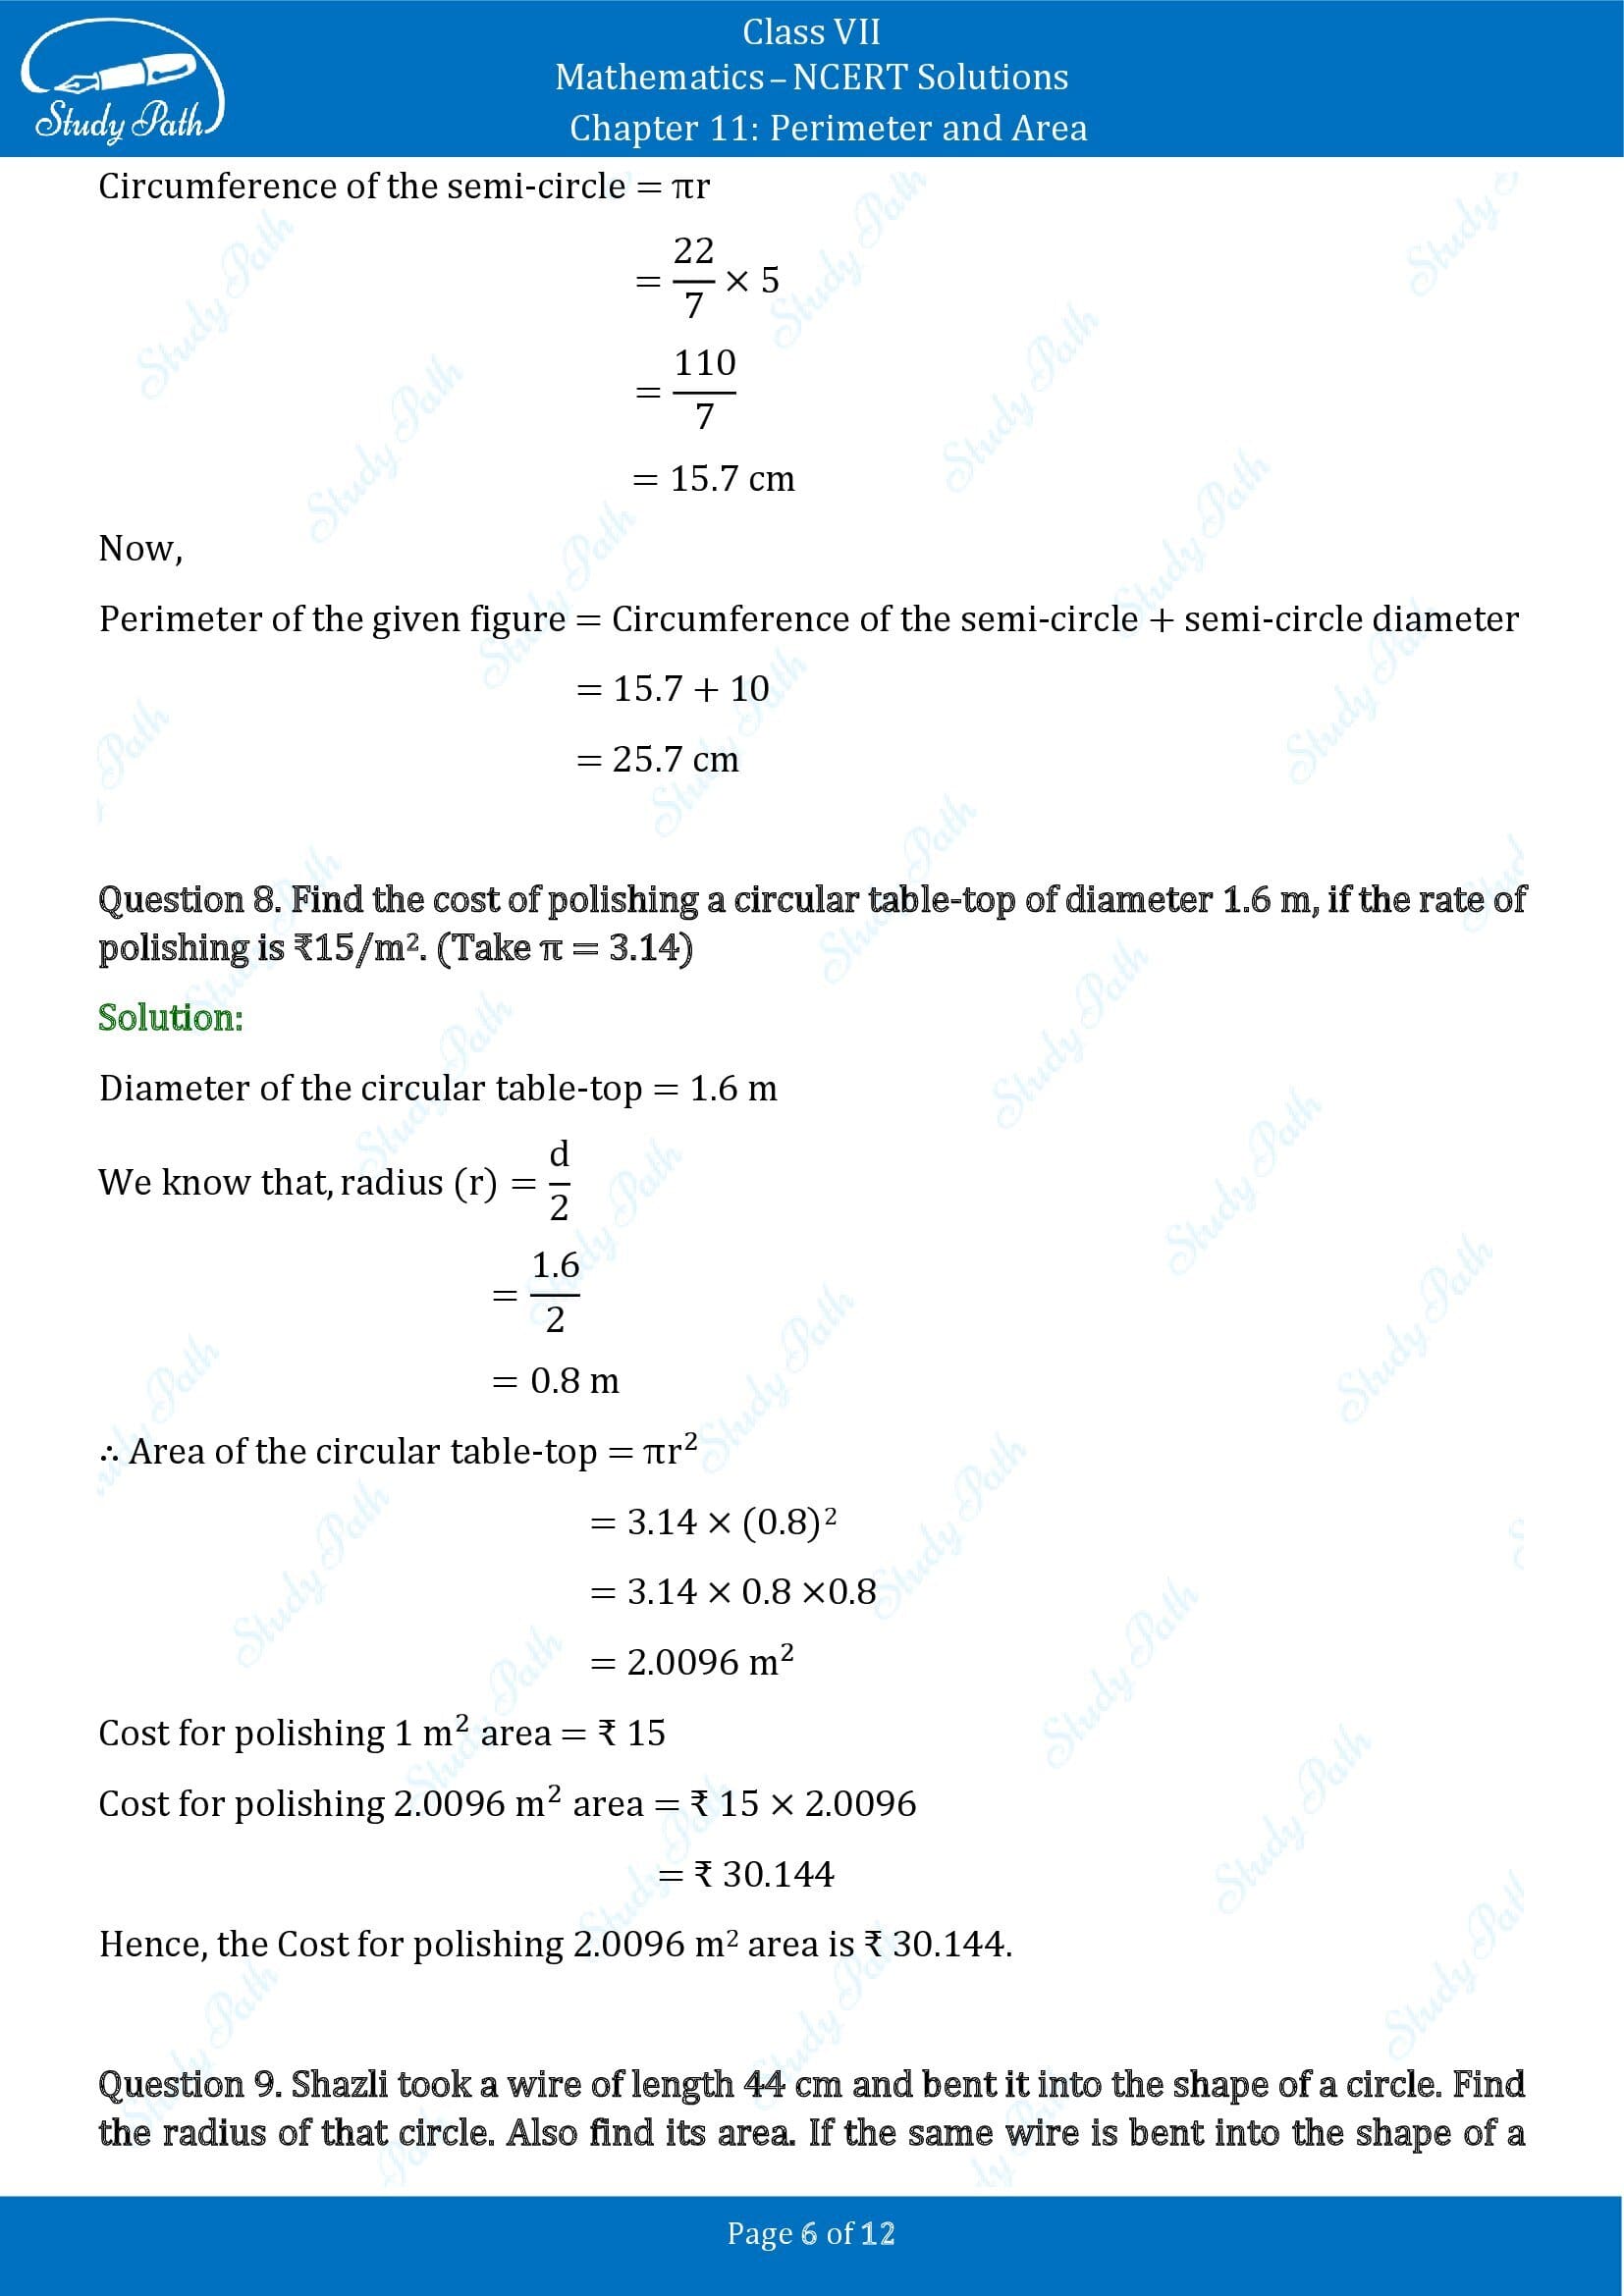 NCERT Solutions for Class 7 Maths Chapter 11 Perimeter and Area Exercise 11.3 00006